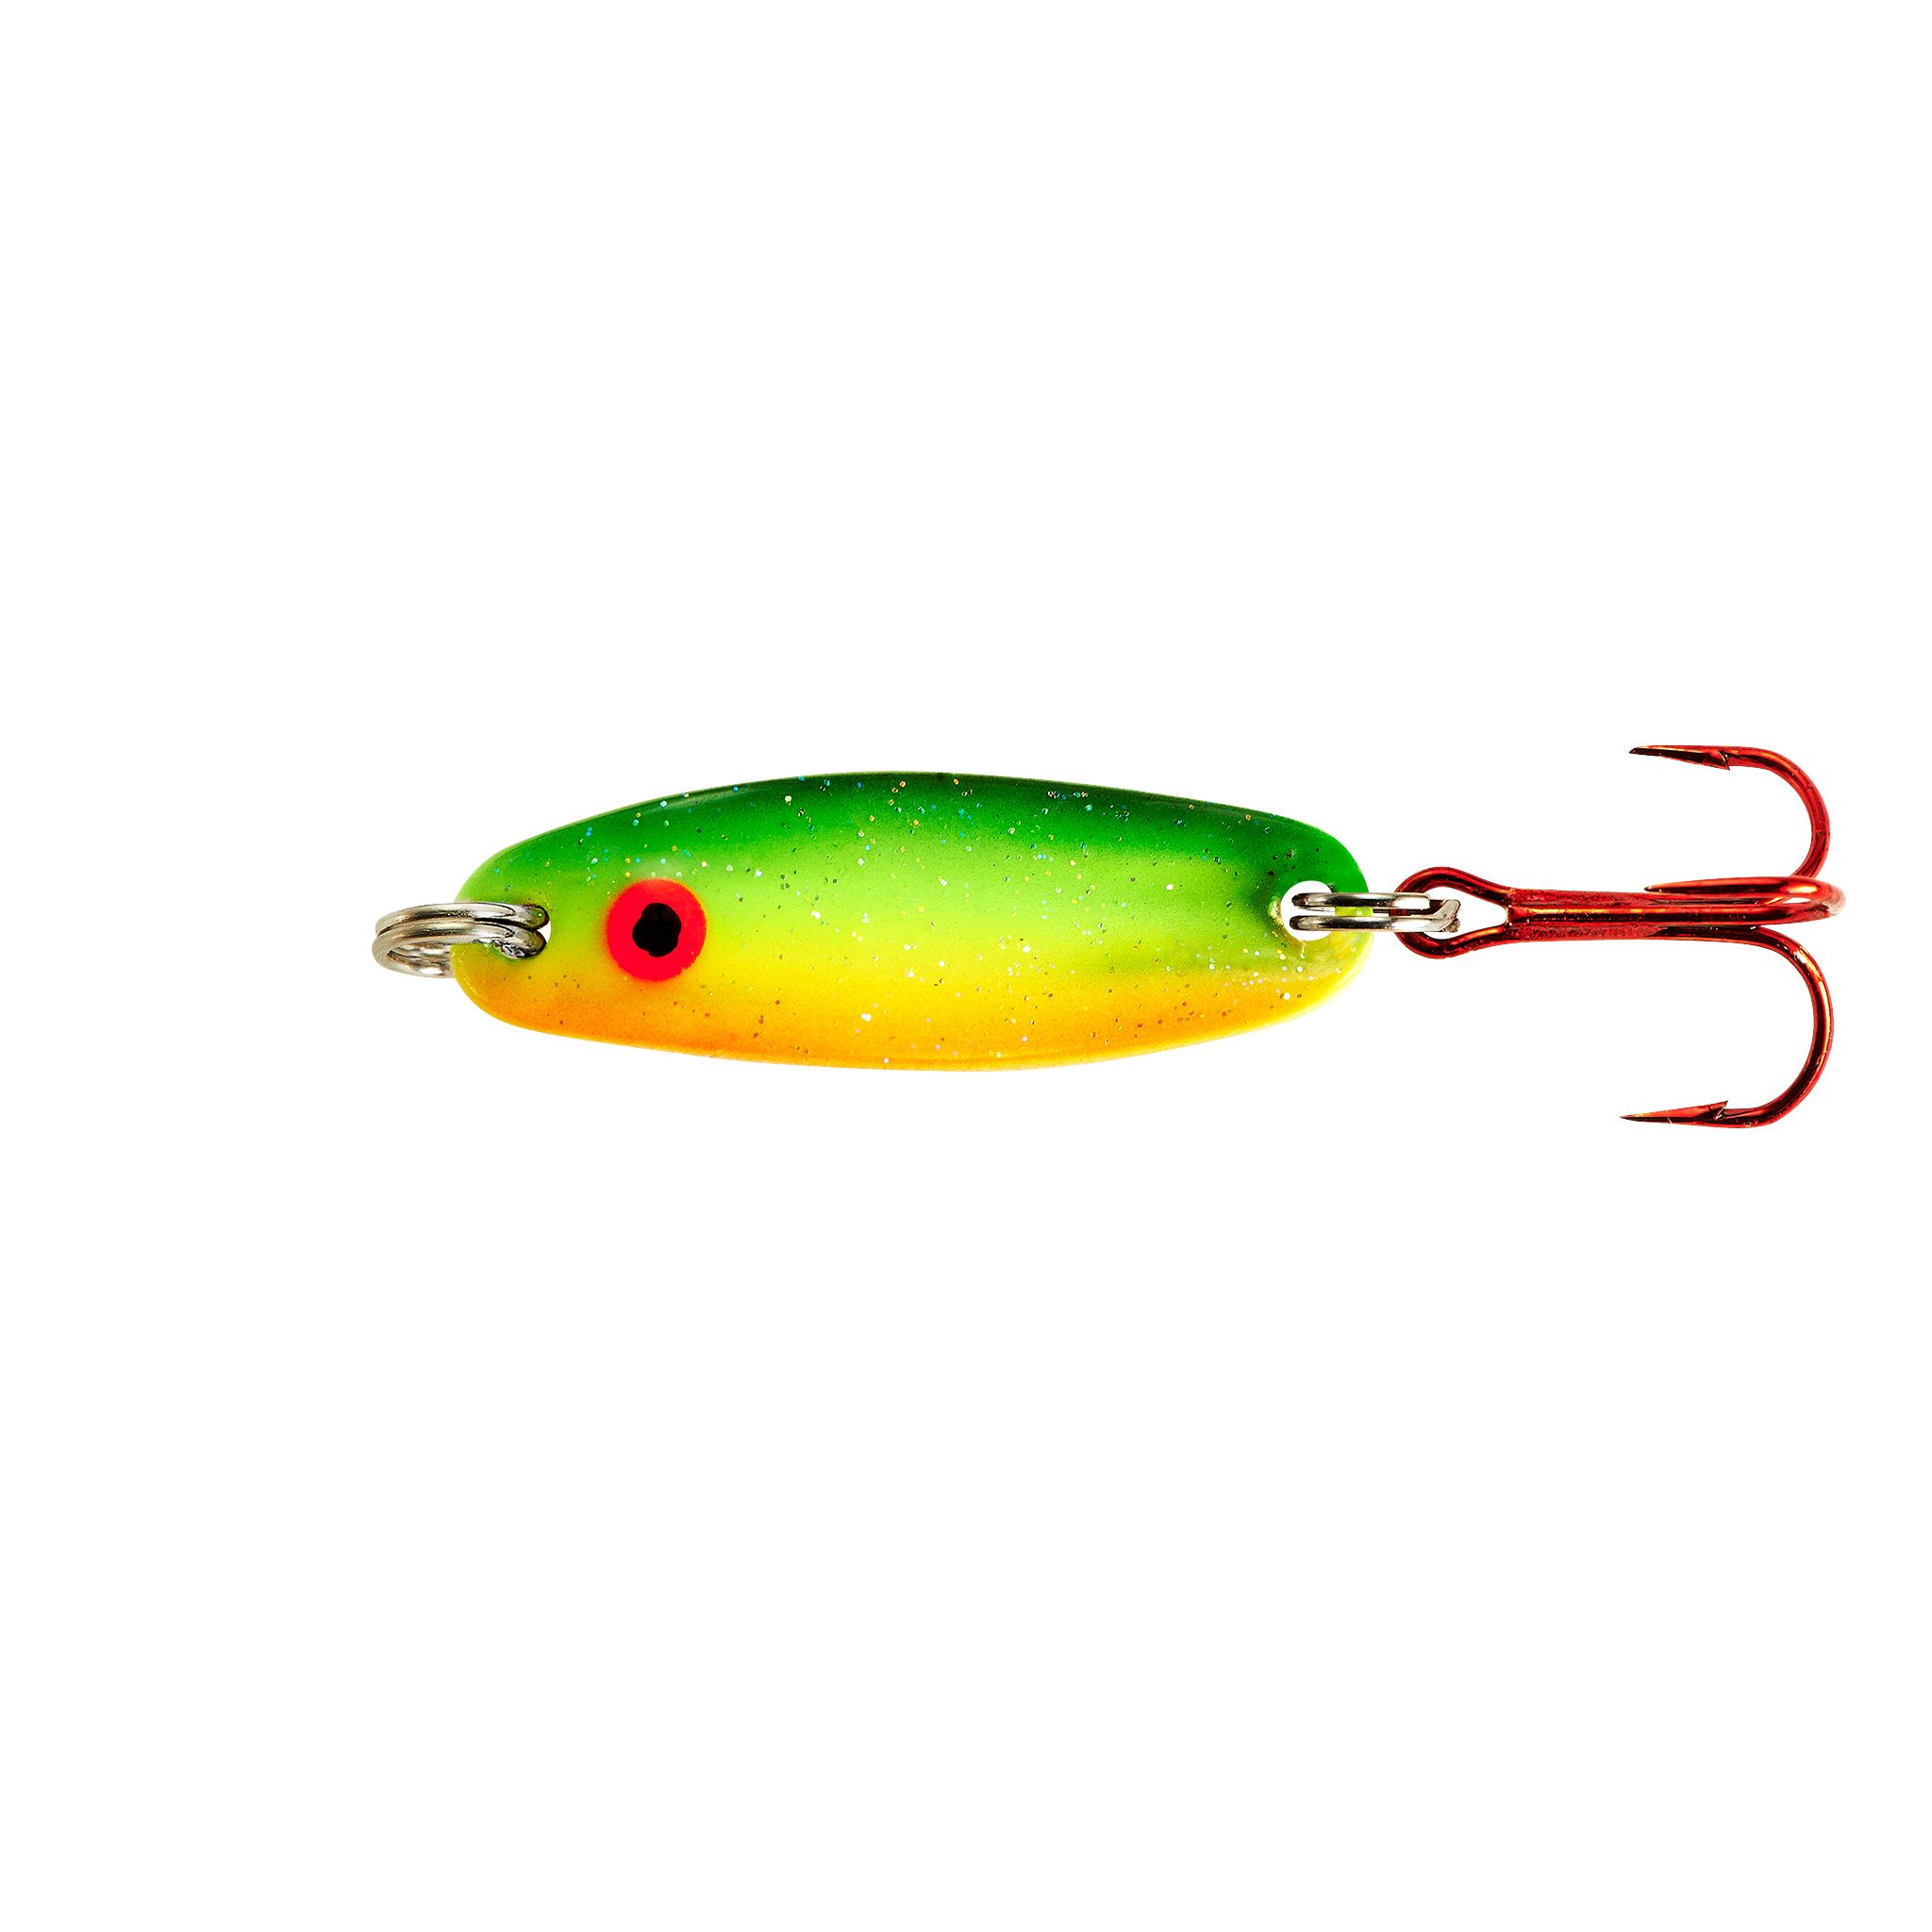 Lindy Quiver Spoon 1/16, 1/8, or 1/4 oz. Walleye, Trout, & Crappie Fishing